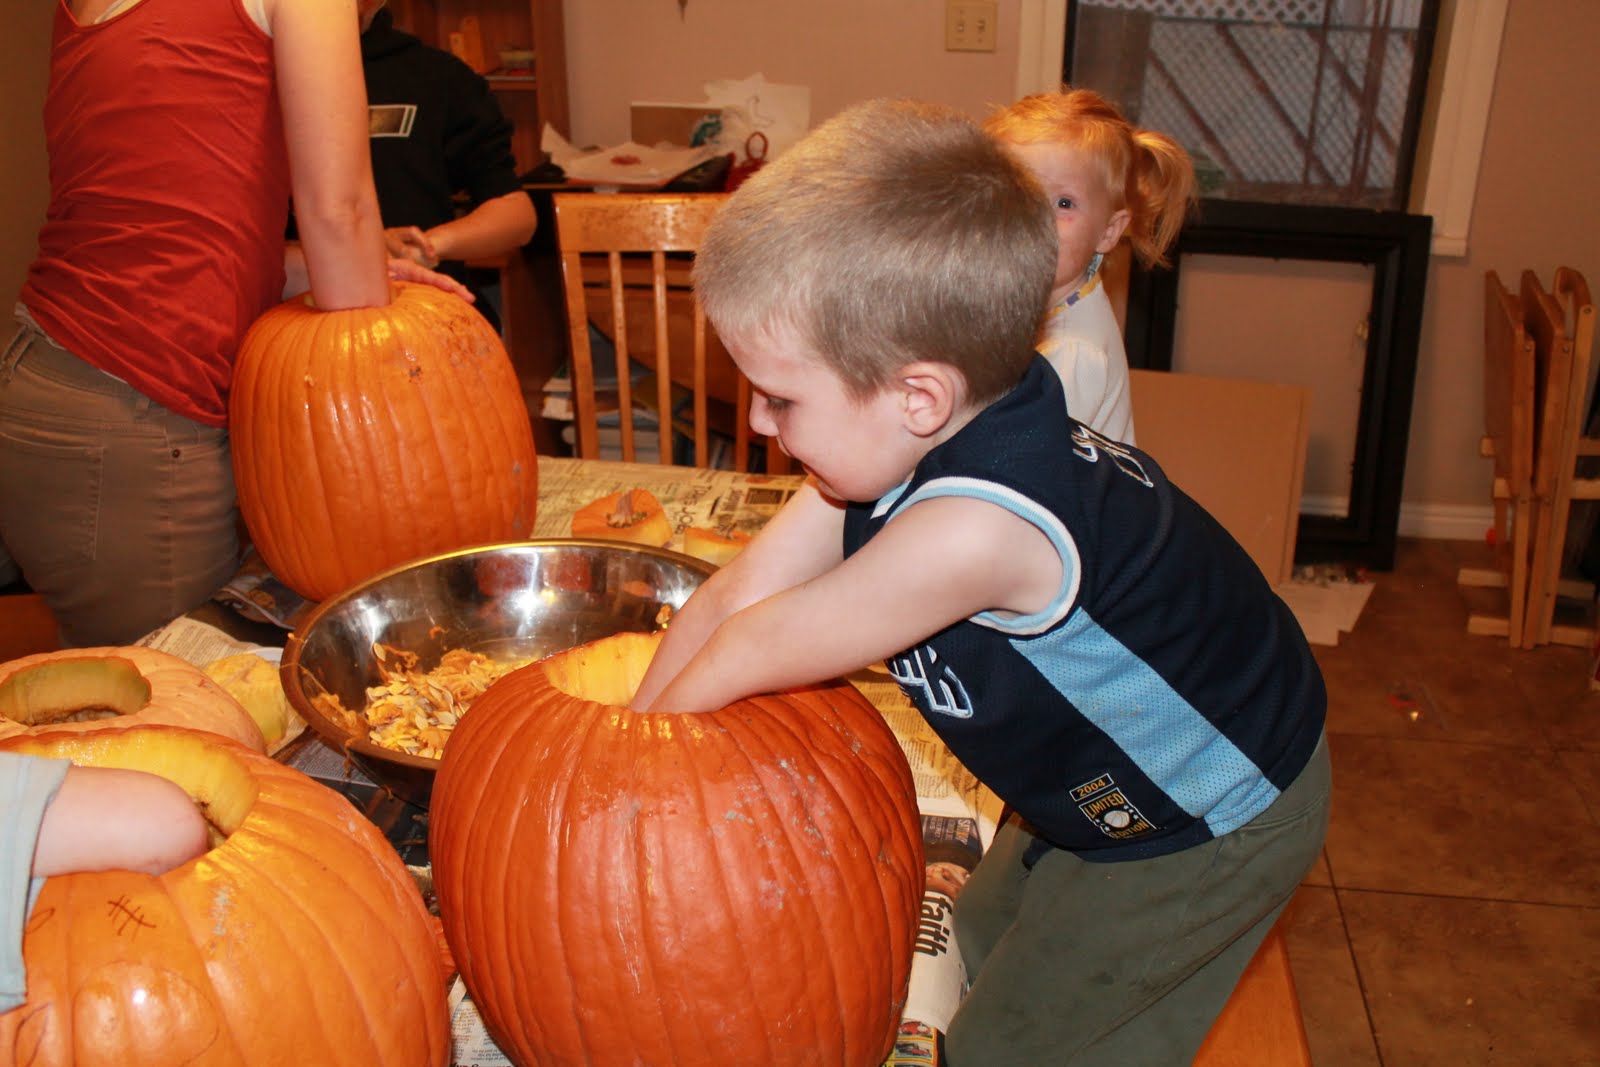 The Guymon Family: Finding Joy in Our Journey: Carving Pumpkins